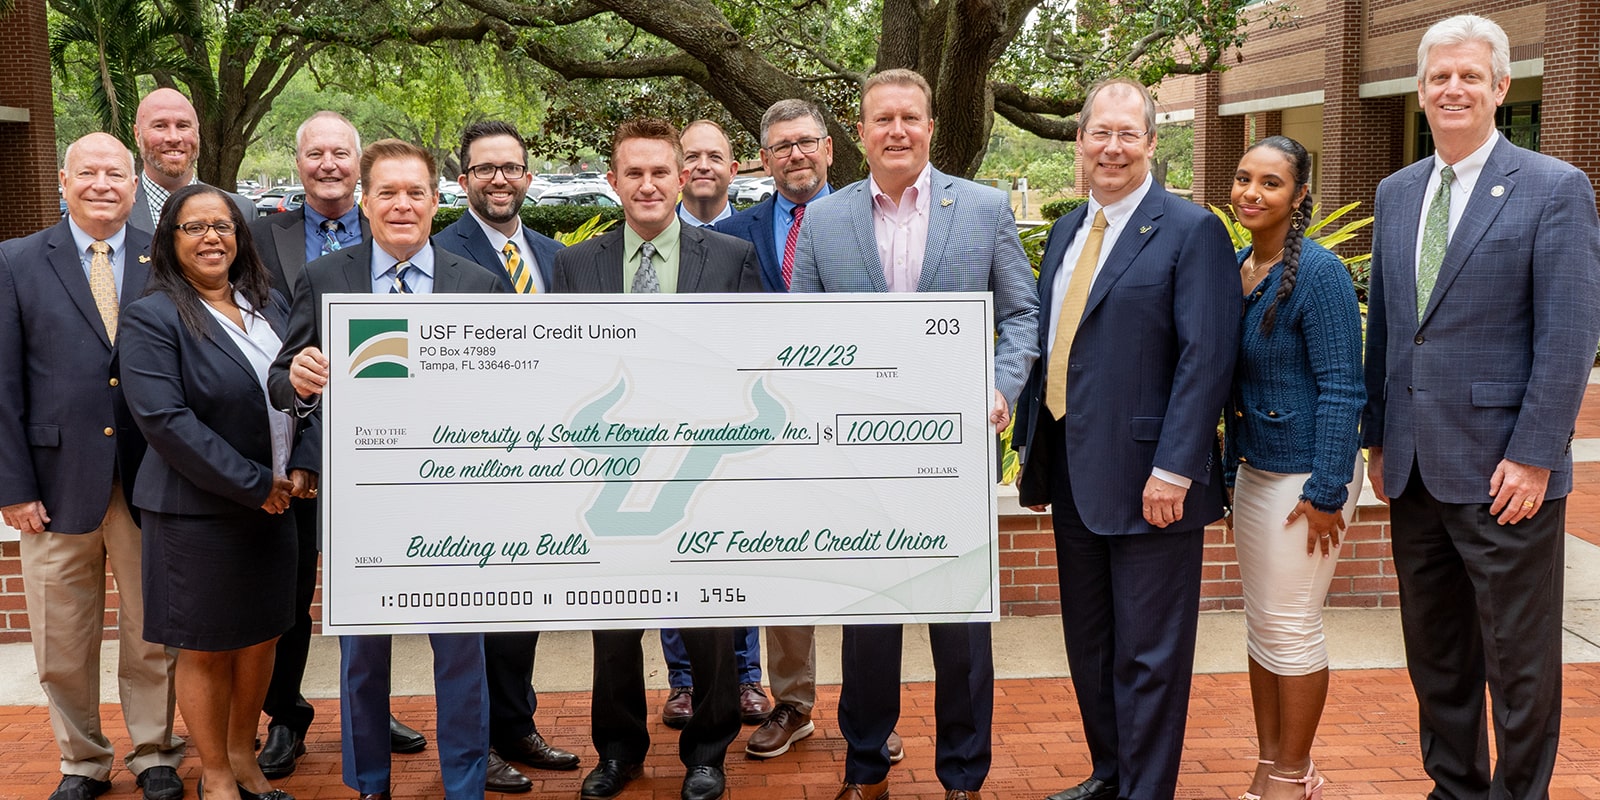 USF receives $1M gift from USF Federal Credit Union, elevating longstanding support